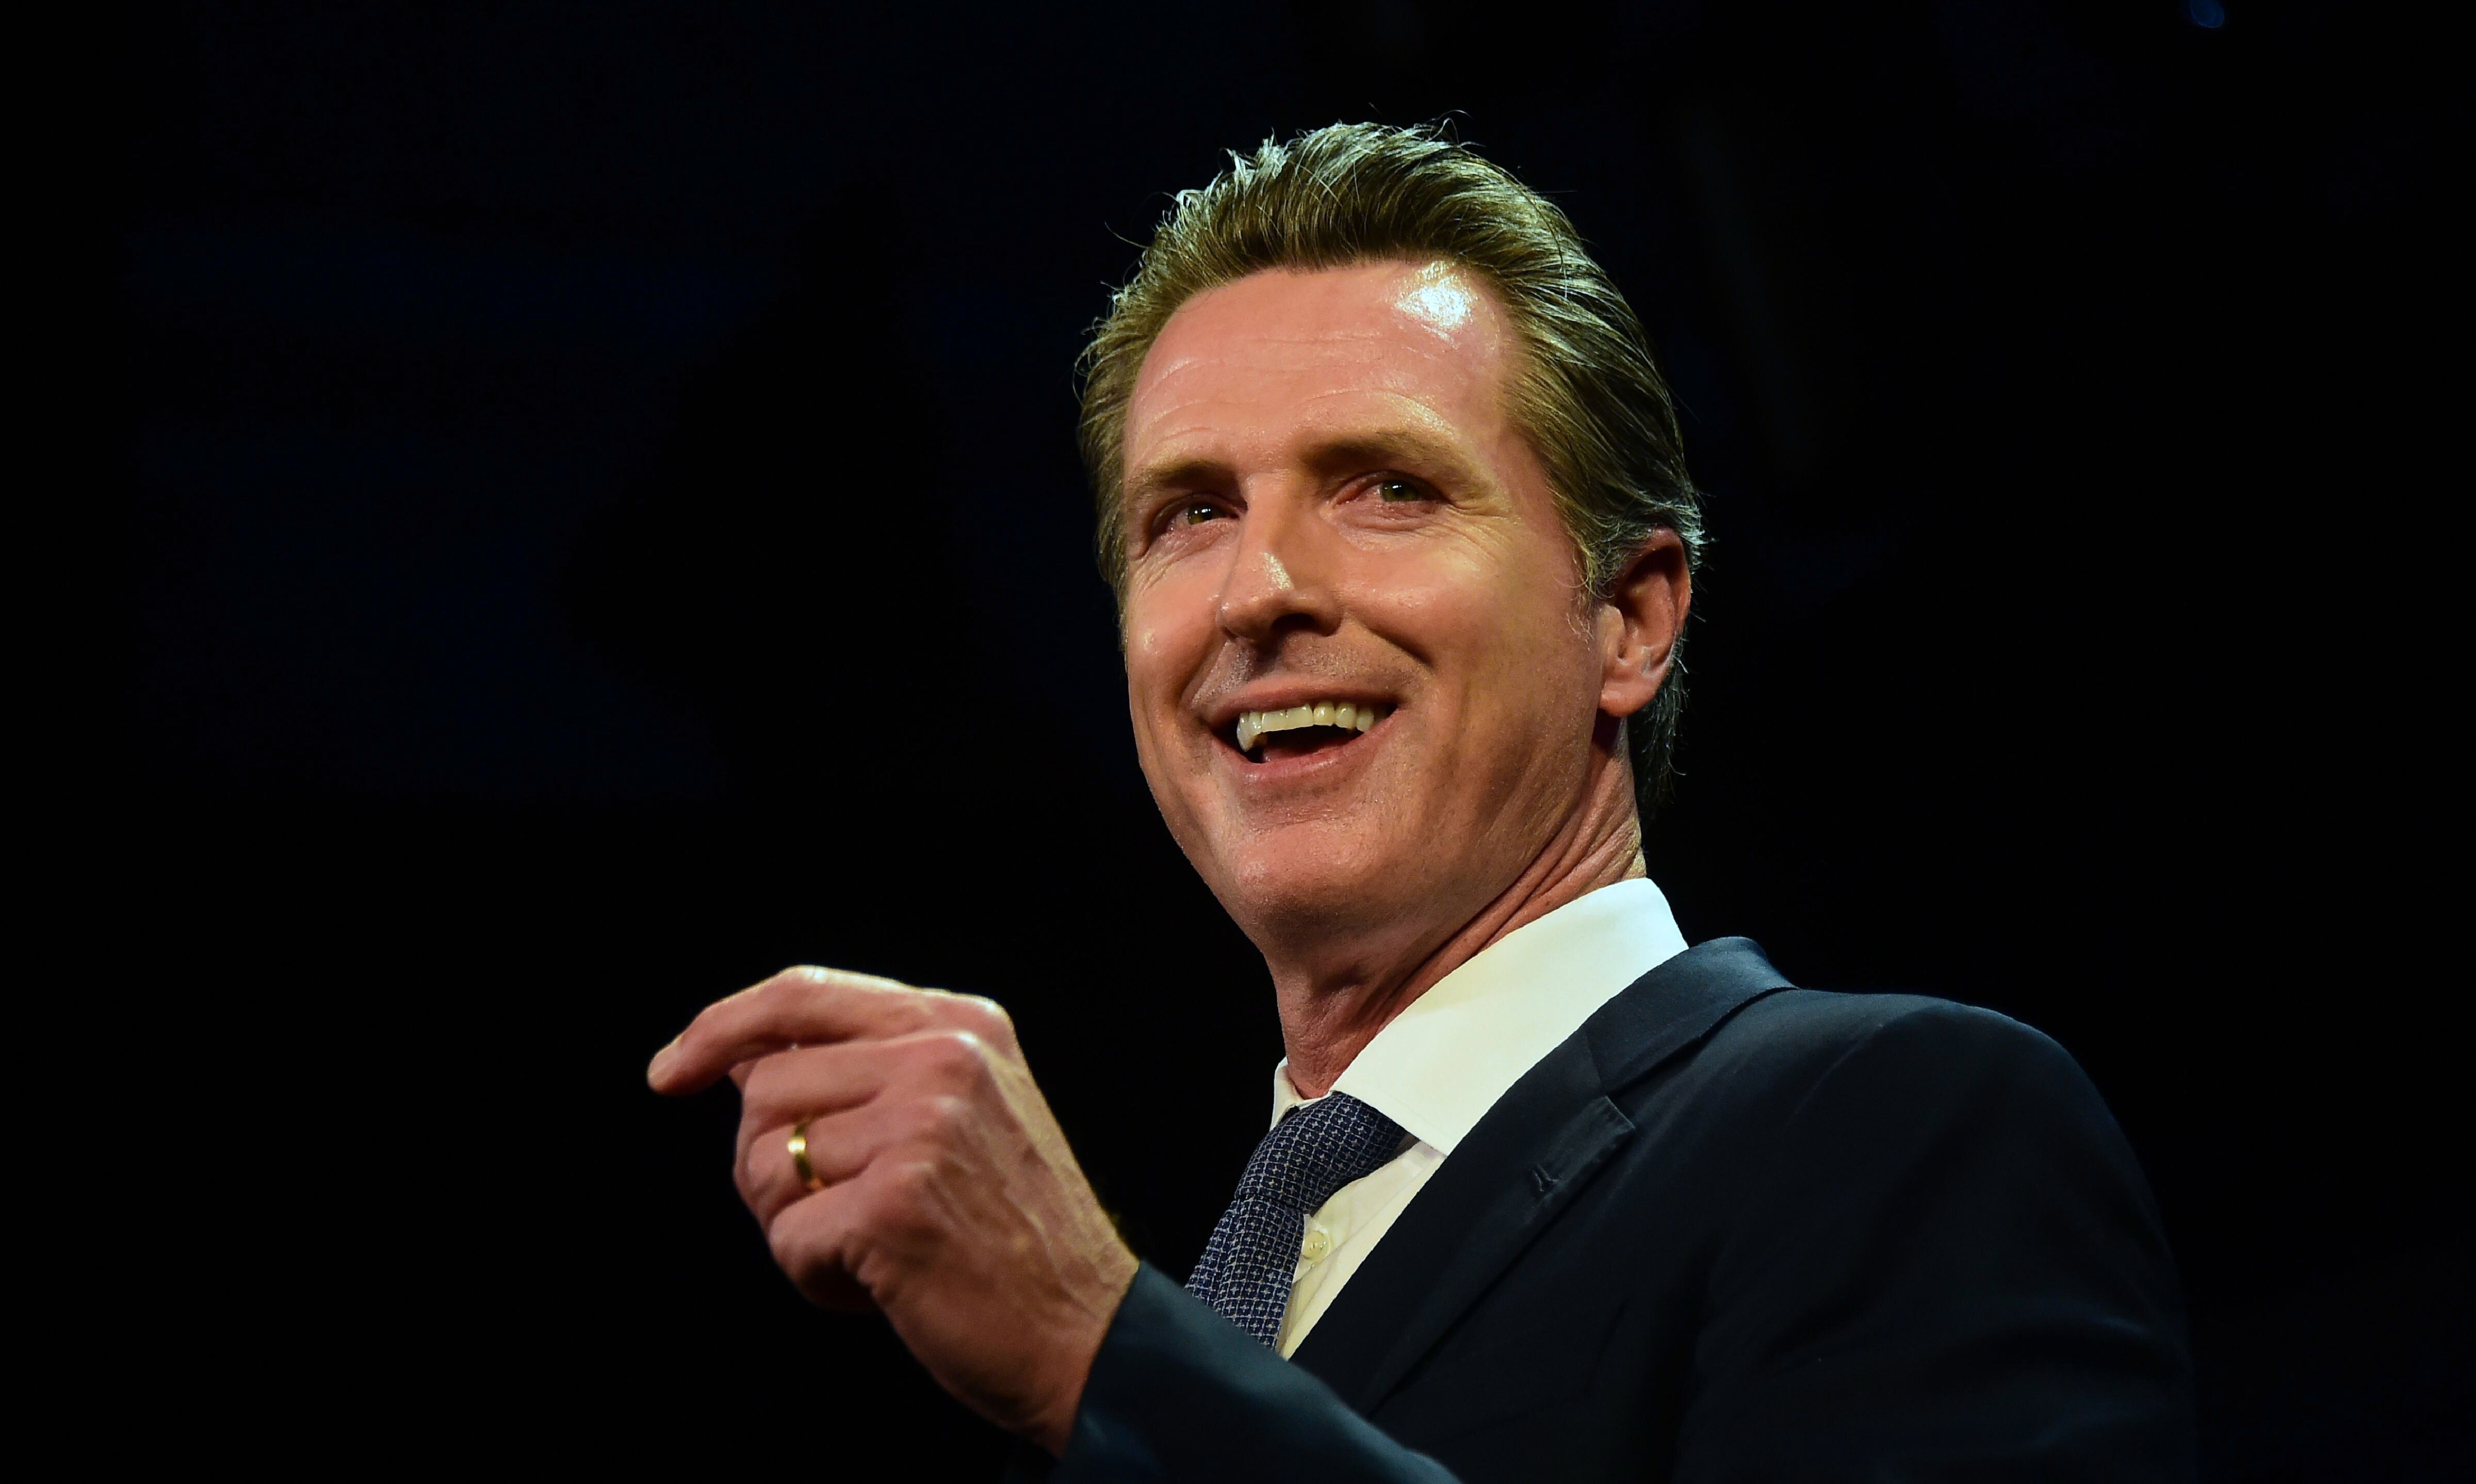 Gov. Gavin Newsom&nbsp;has become the target of frustrated Californians during the COVID-19 pandemic.